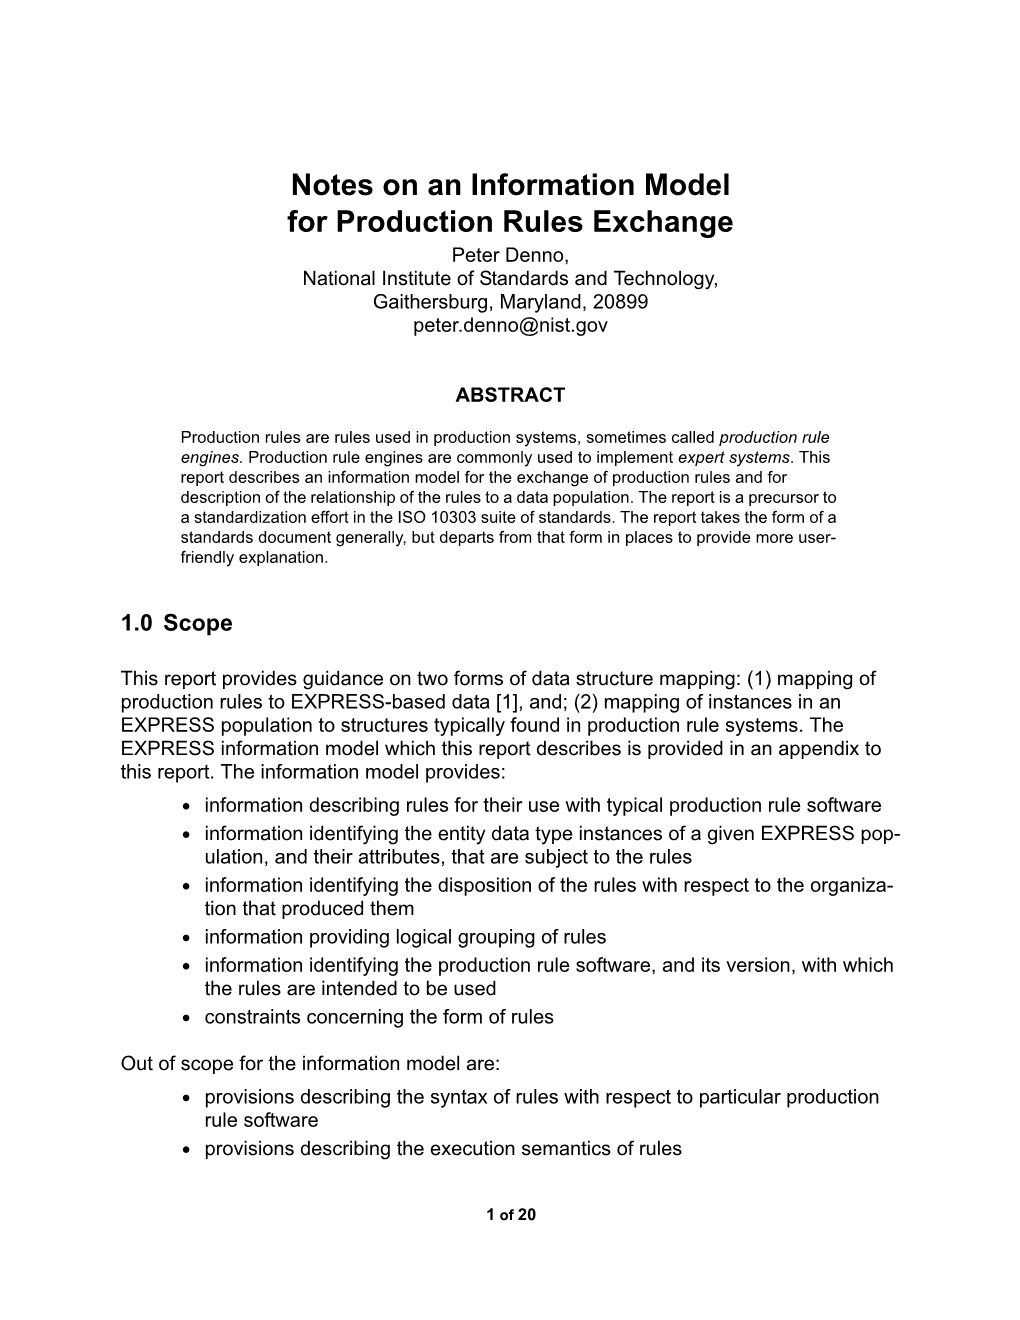 Notes on an Information Model for Production Rules Exchange